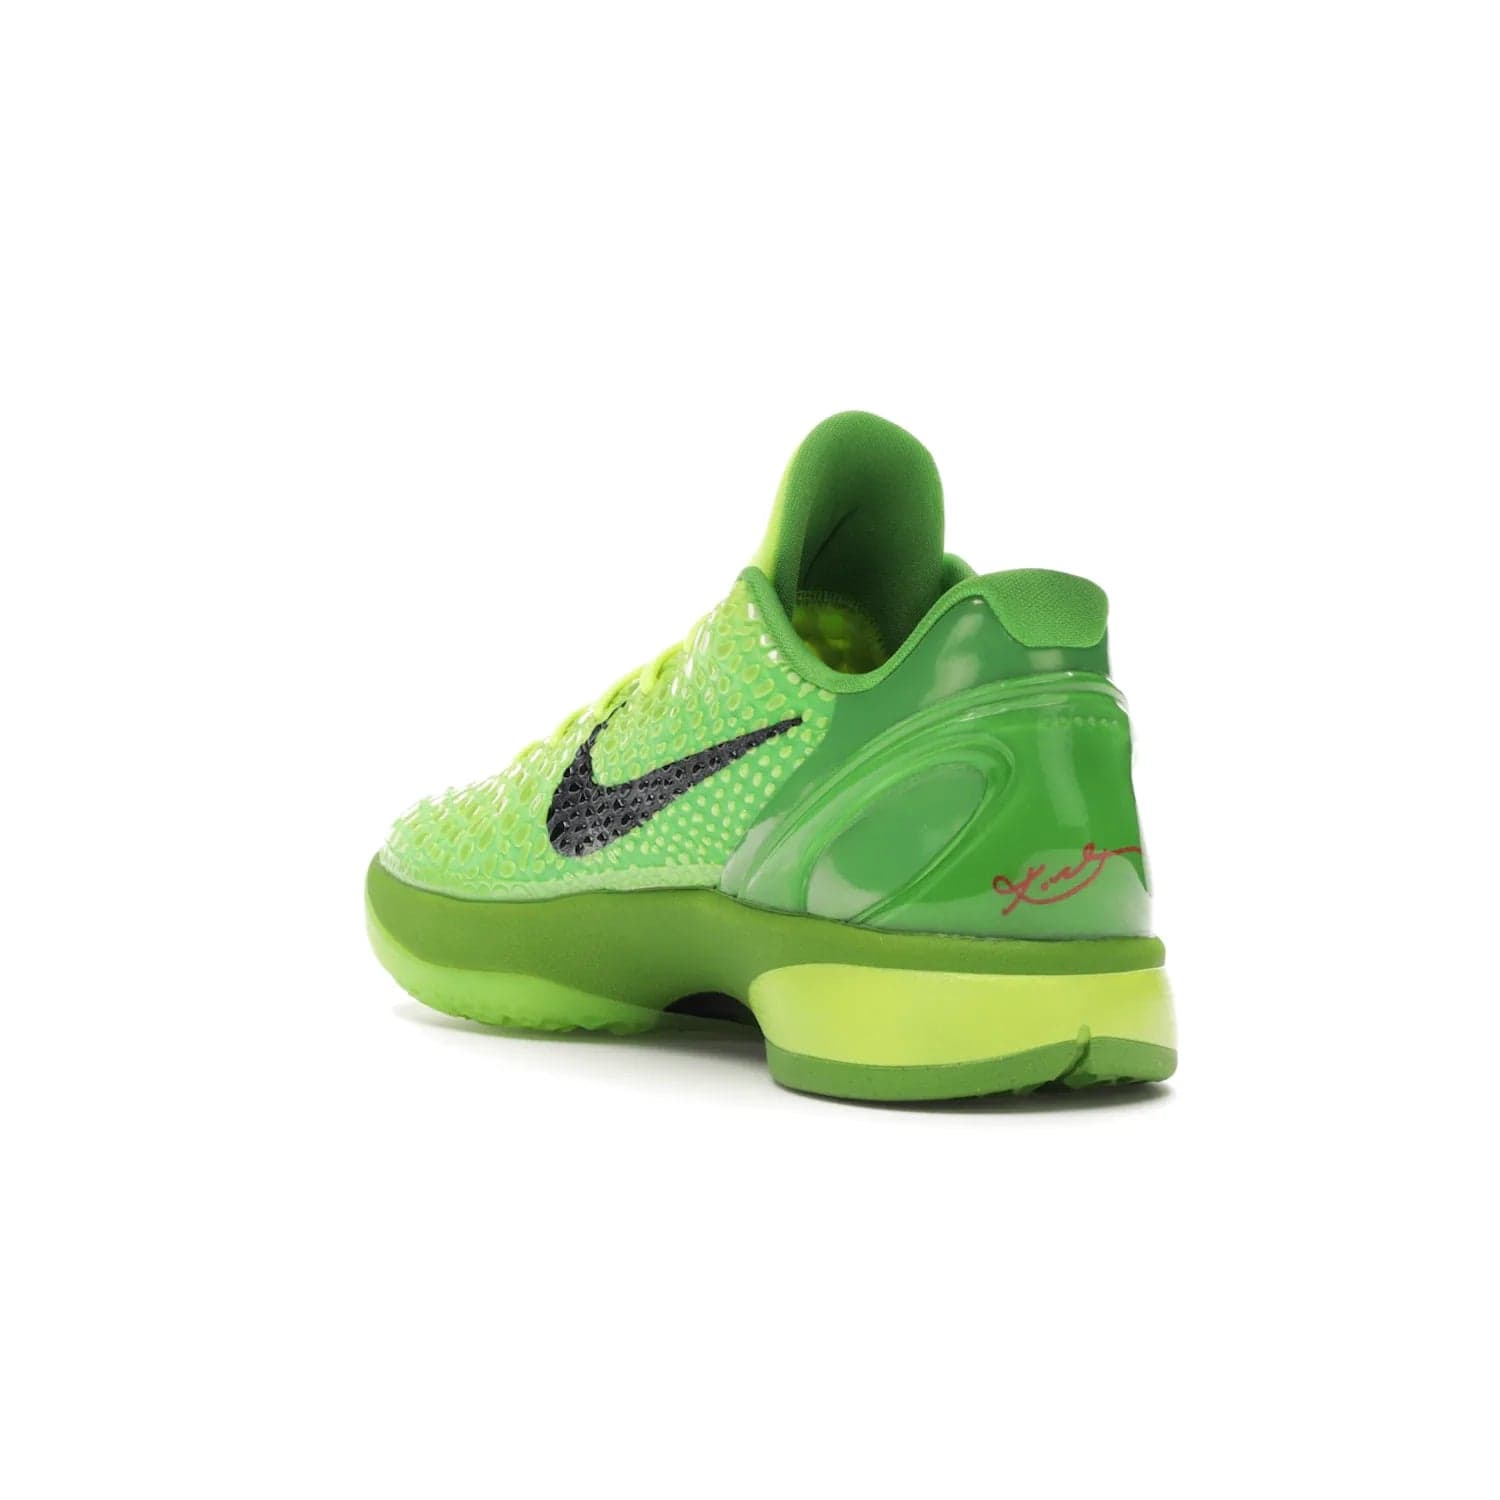 Nike Kobe 6 Protro Grinch (2020) - Image 25 - Only at www.BallersClubKickz.com - #
The Nike Kobe 6 Protro Grinch updates the iconic 2011 design with modern tech like a Zoom Air cushioning system, scaled-down traction, and updated silhouette. Experience the textured Green Apple and Volt upper plus bright red and green accents for $180.